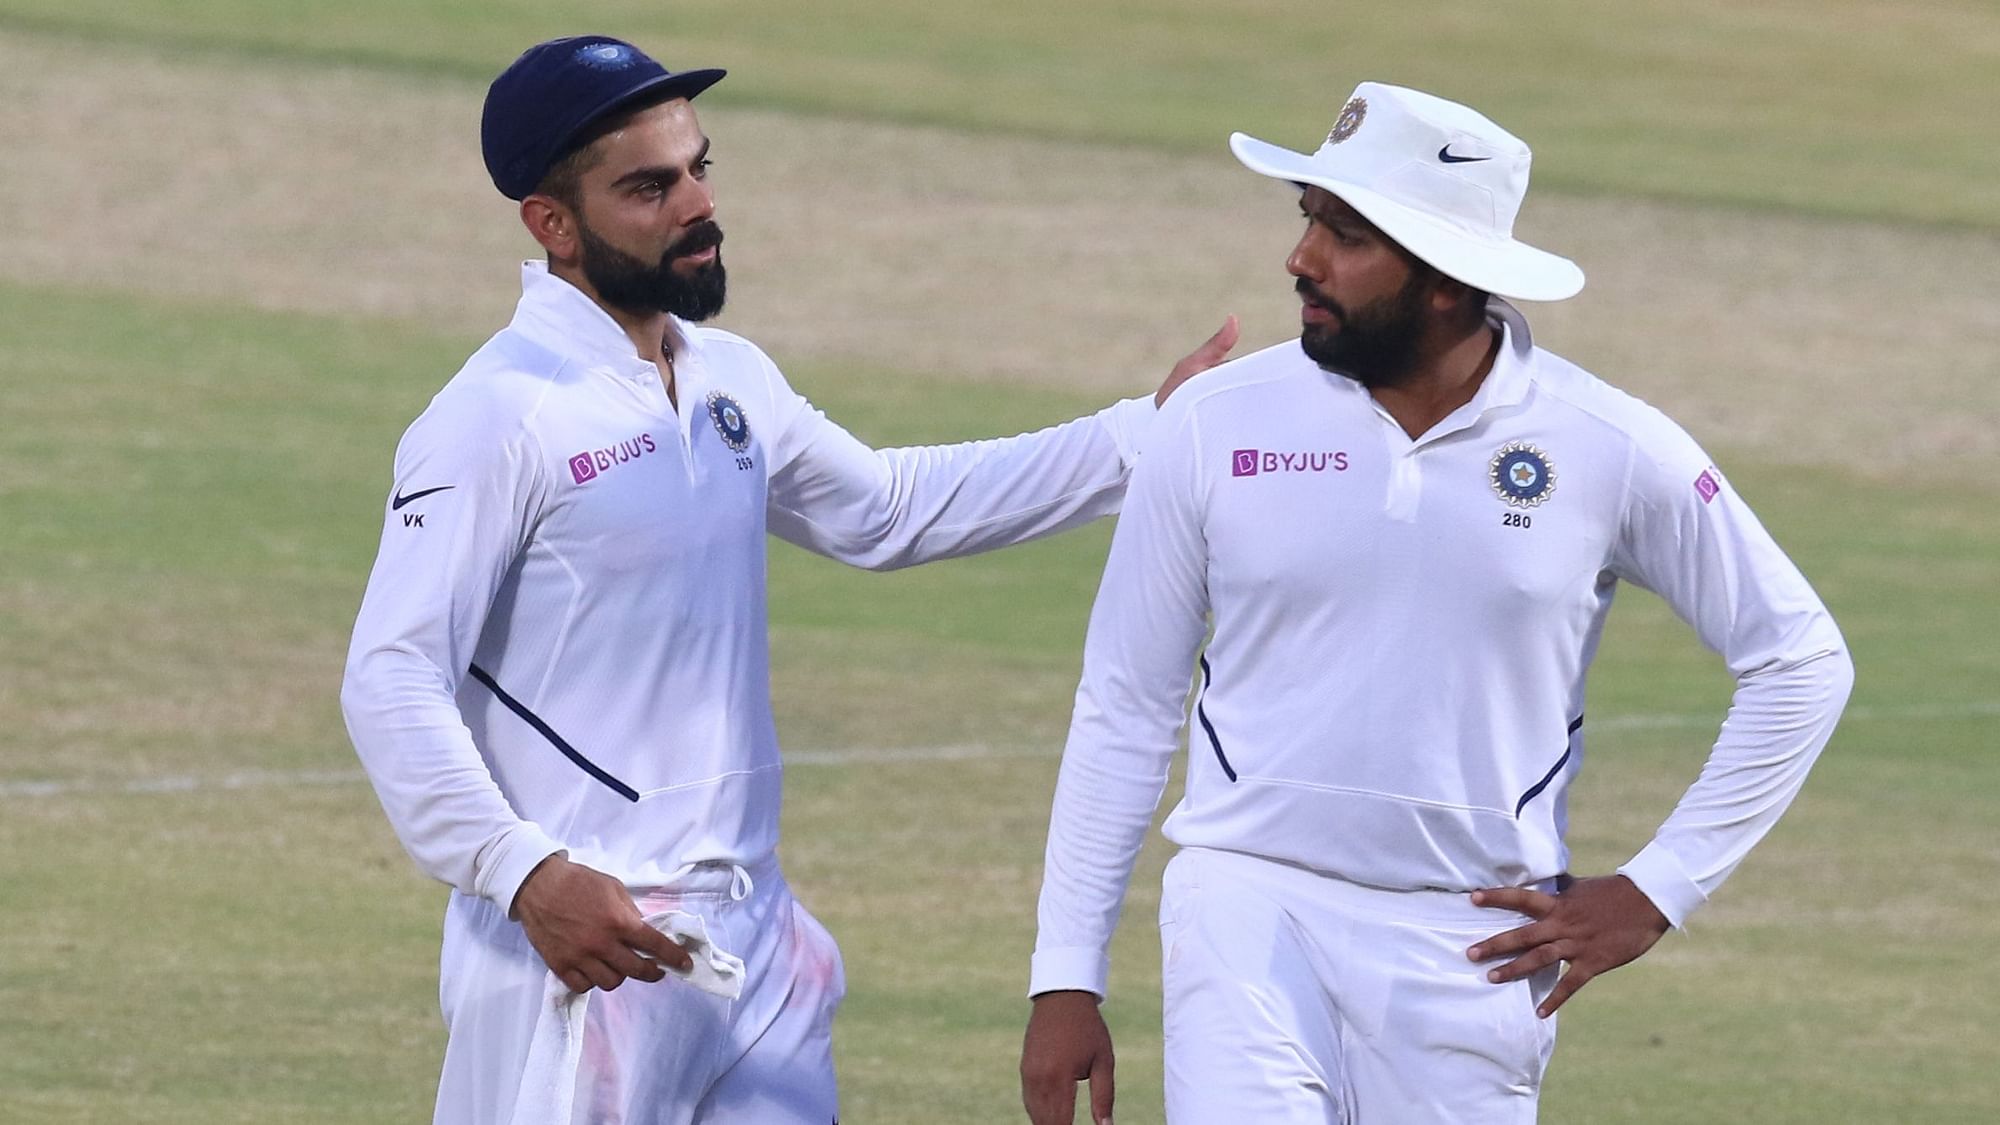 Virat Kohli and Rohit Sharma during the India vs South Africa Test at Vizag.